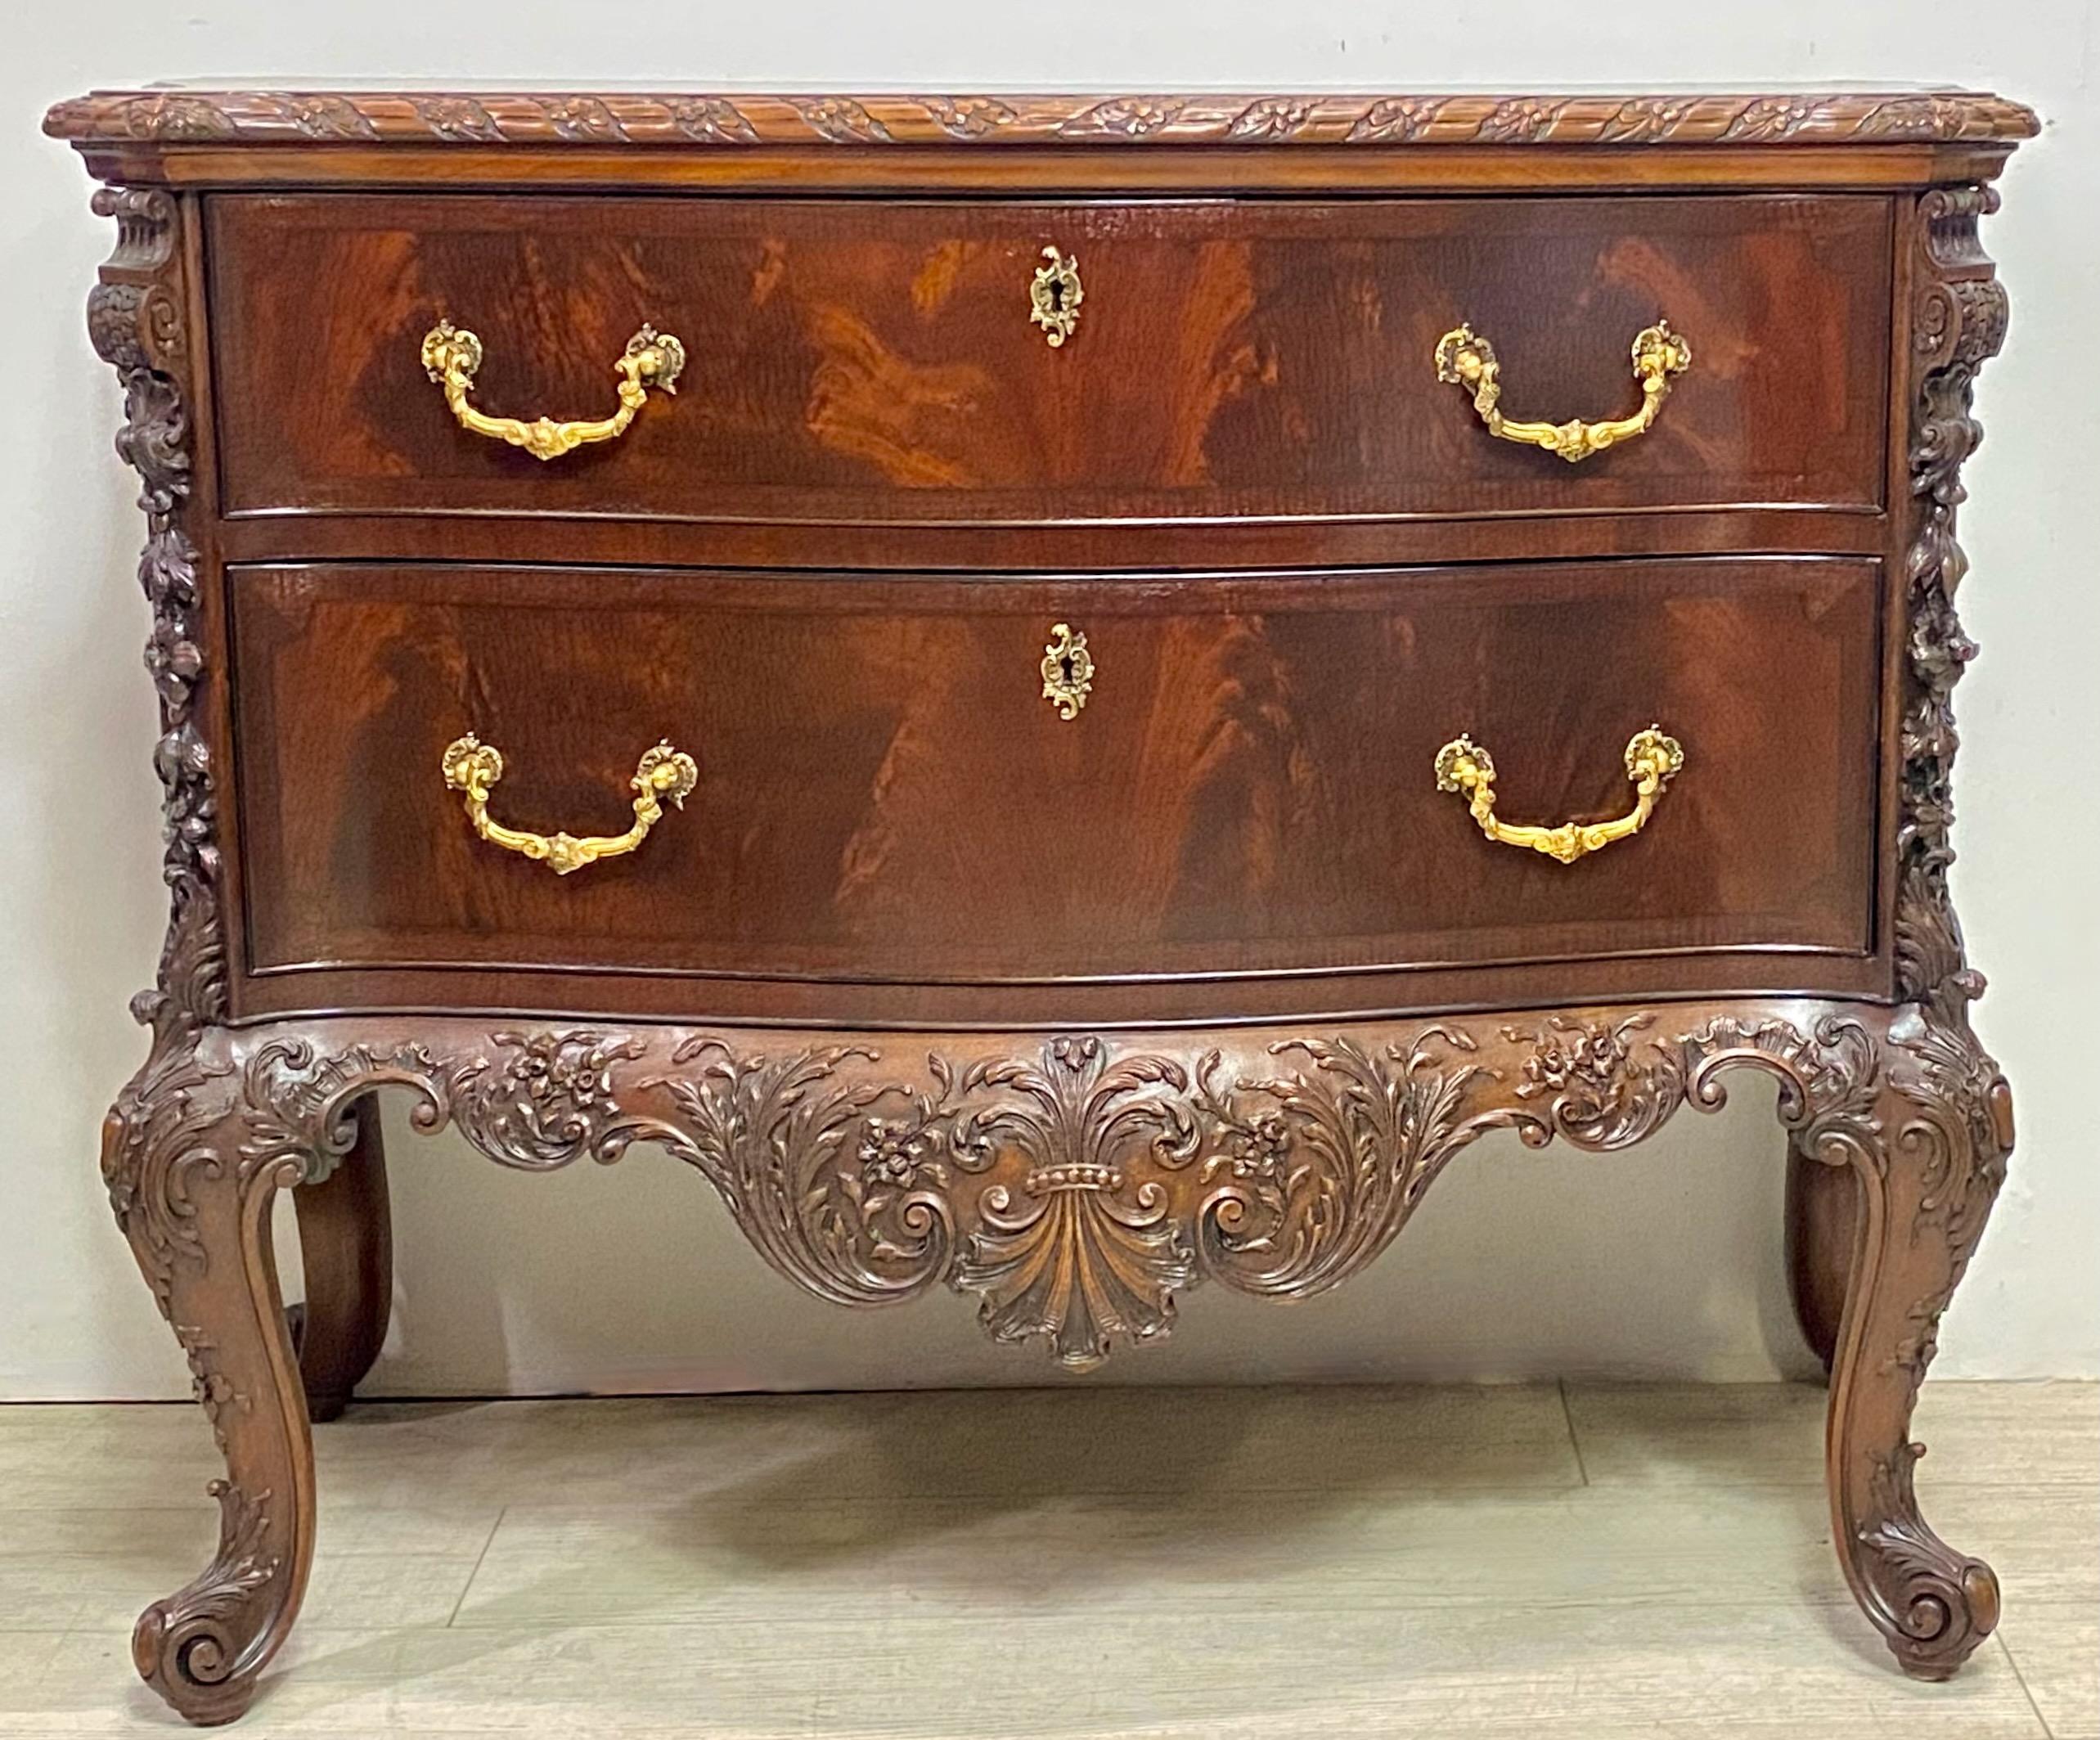 An exceptional bench-made hand crafted solid mahogany two drawer chest with elaborately carved detail, sitting on cabriolet legs and scroll feet with brass pulls. 
100 percent mahogany with crotch veneer over solid mahogany drawer fronts.
This is